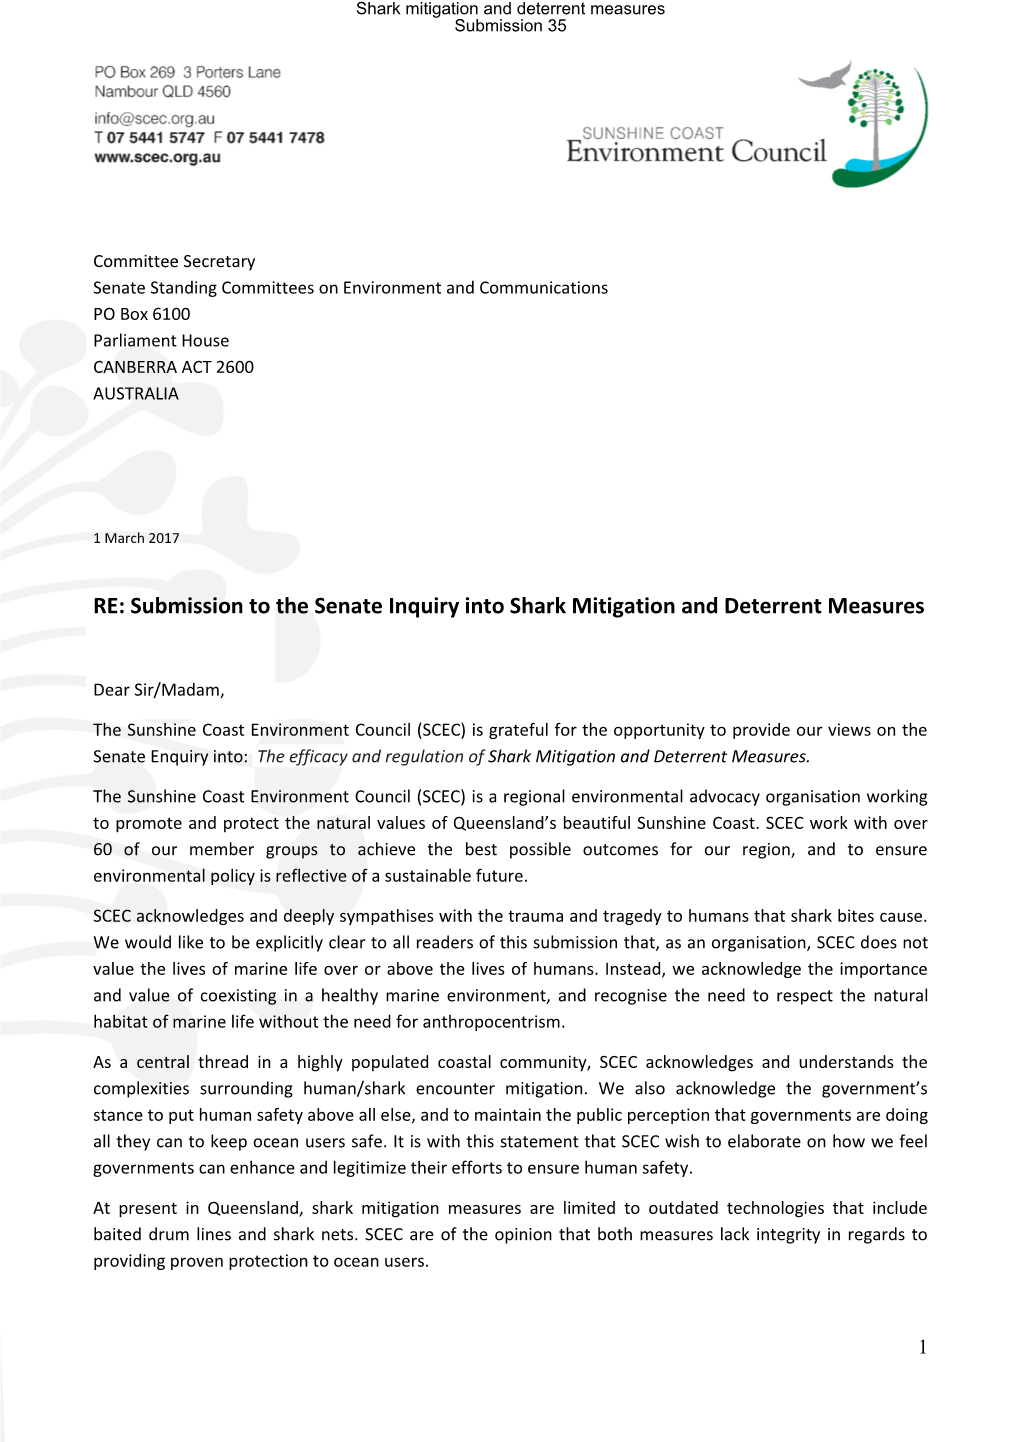 RE: Submission to the Senate Inquiry Into Shark Mitigation and Deterrent Measures